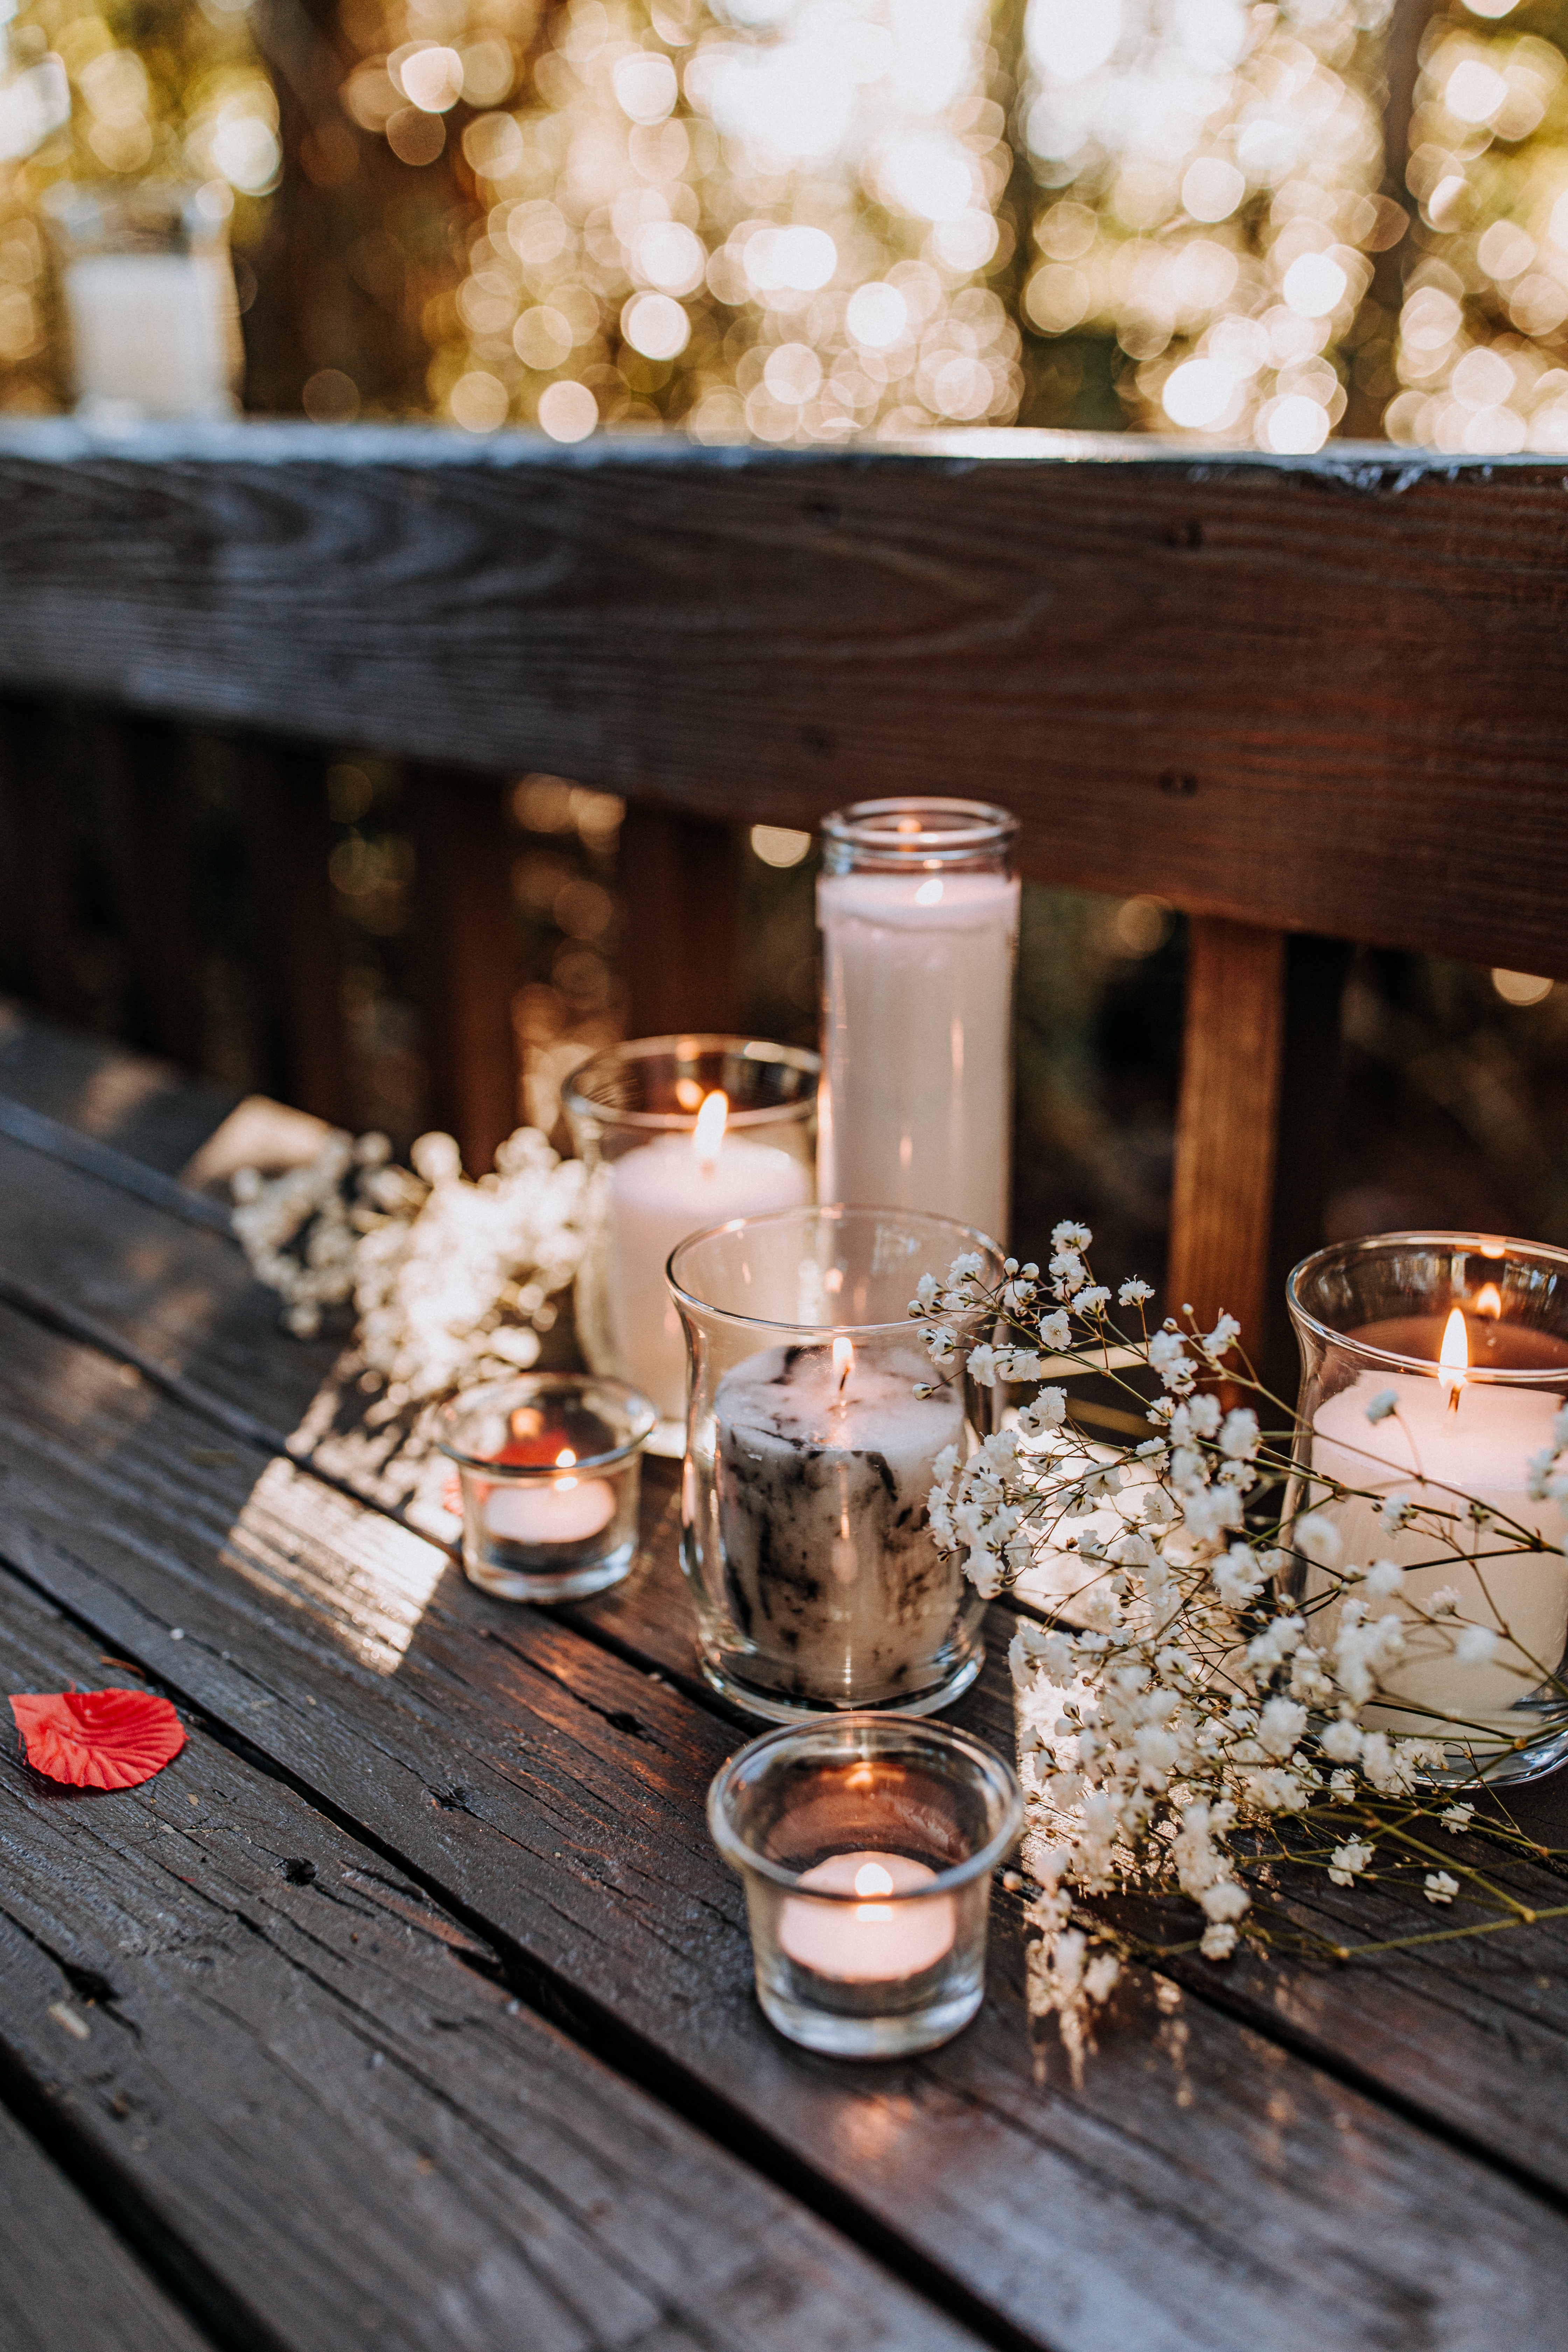 candles, flowers, miscellanea, miscellaneous, table, glasses Full HD